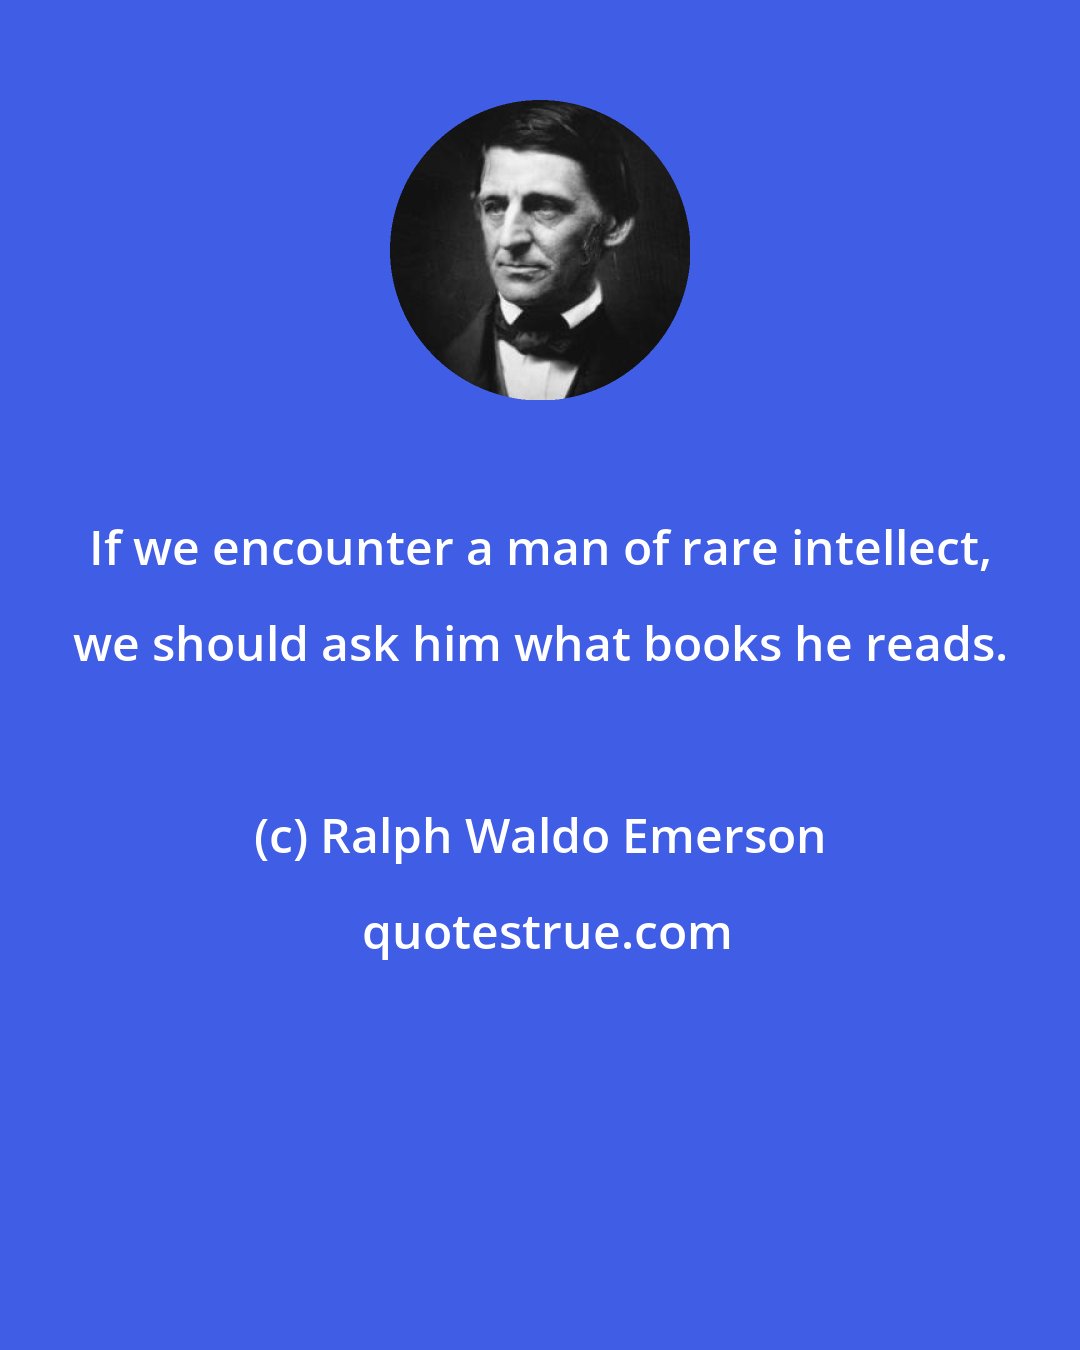 Ralph Waldo Emerson: If we encounter a man of rare intellect, we should ask him what books he reads.